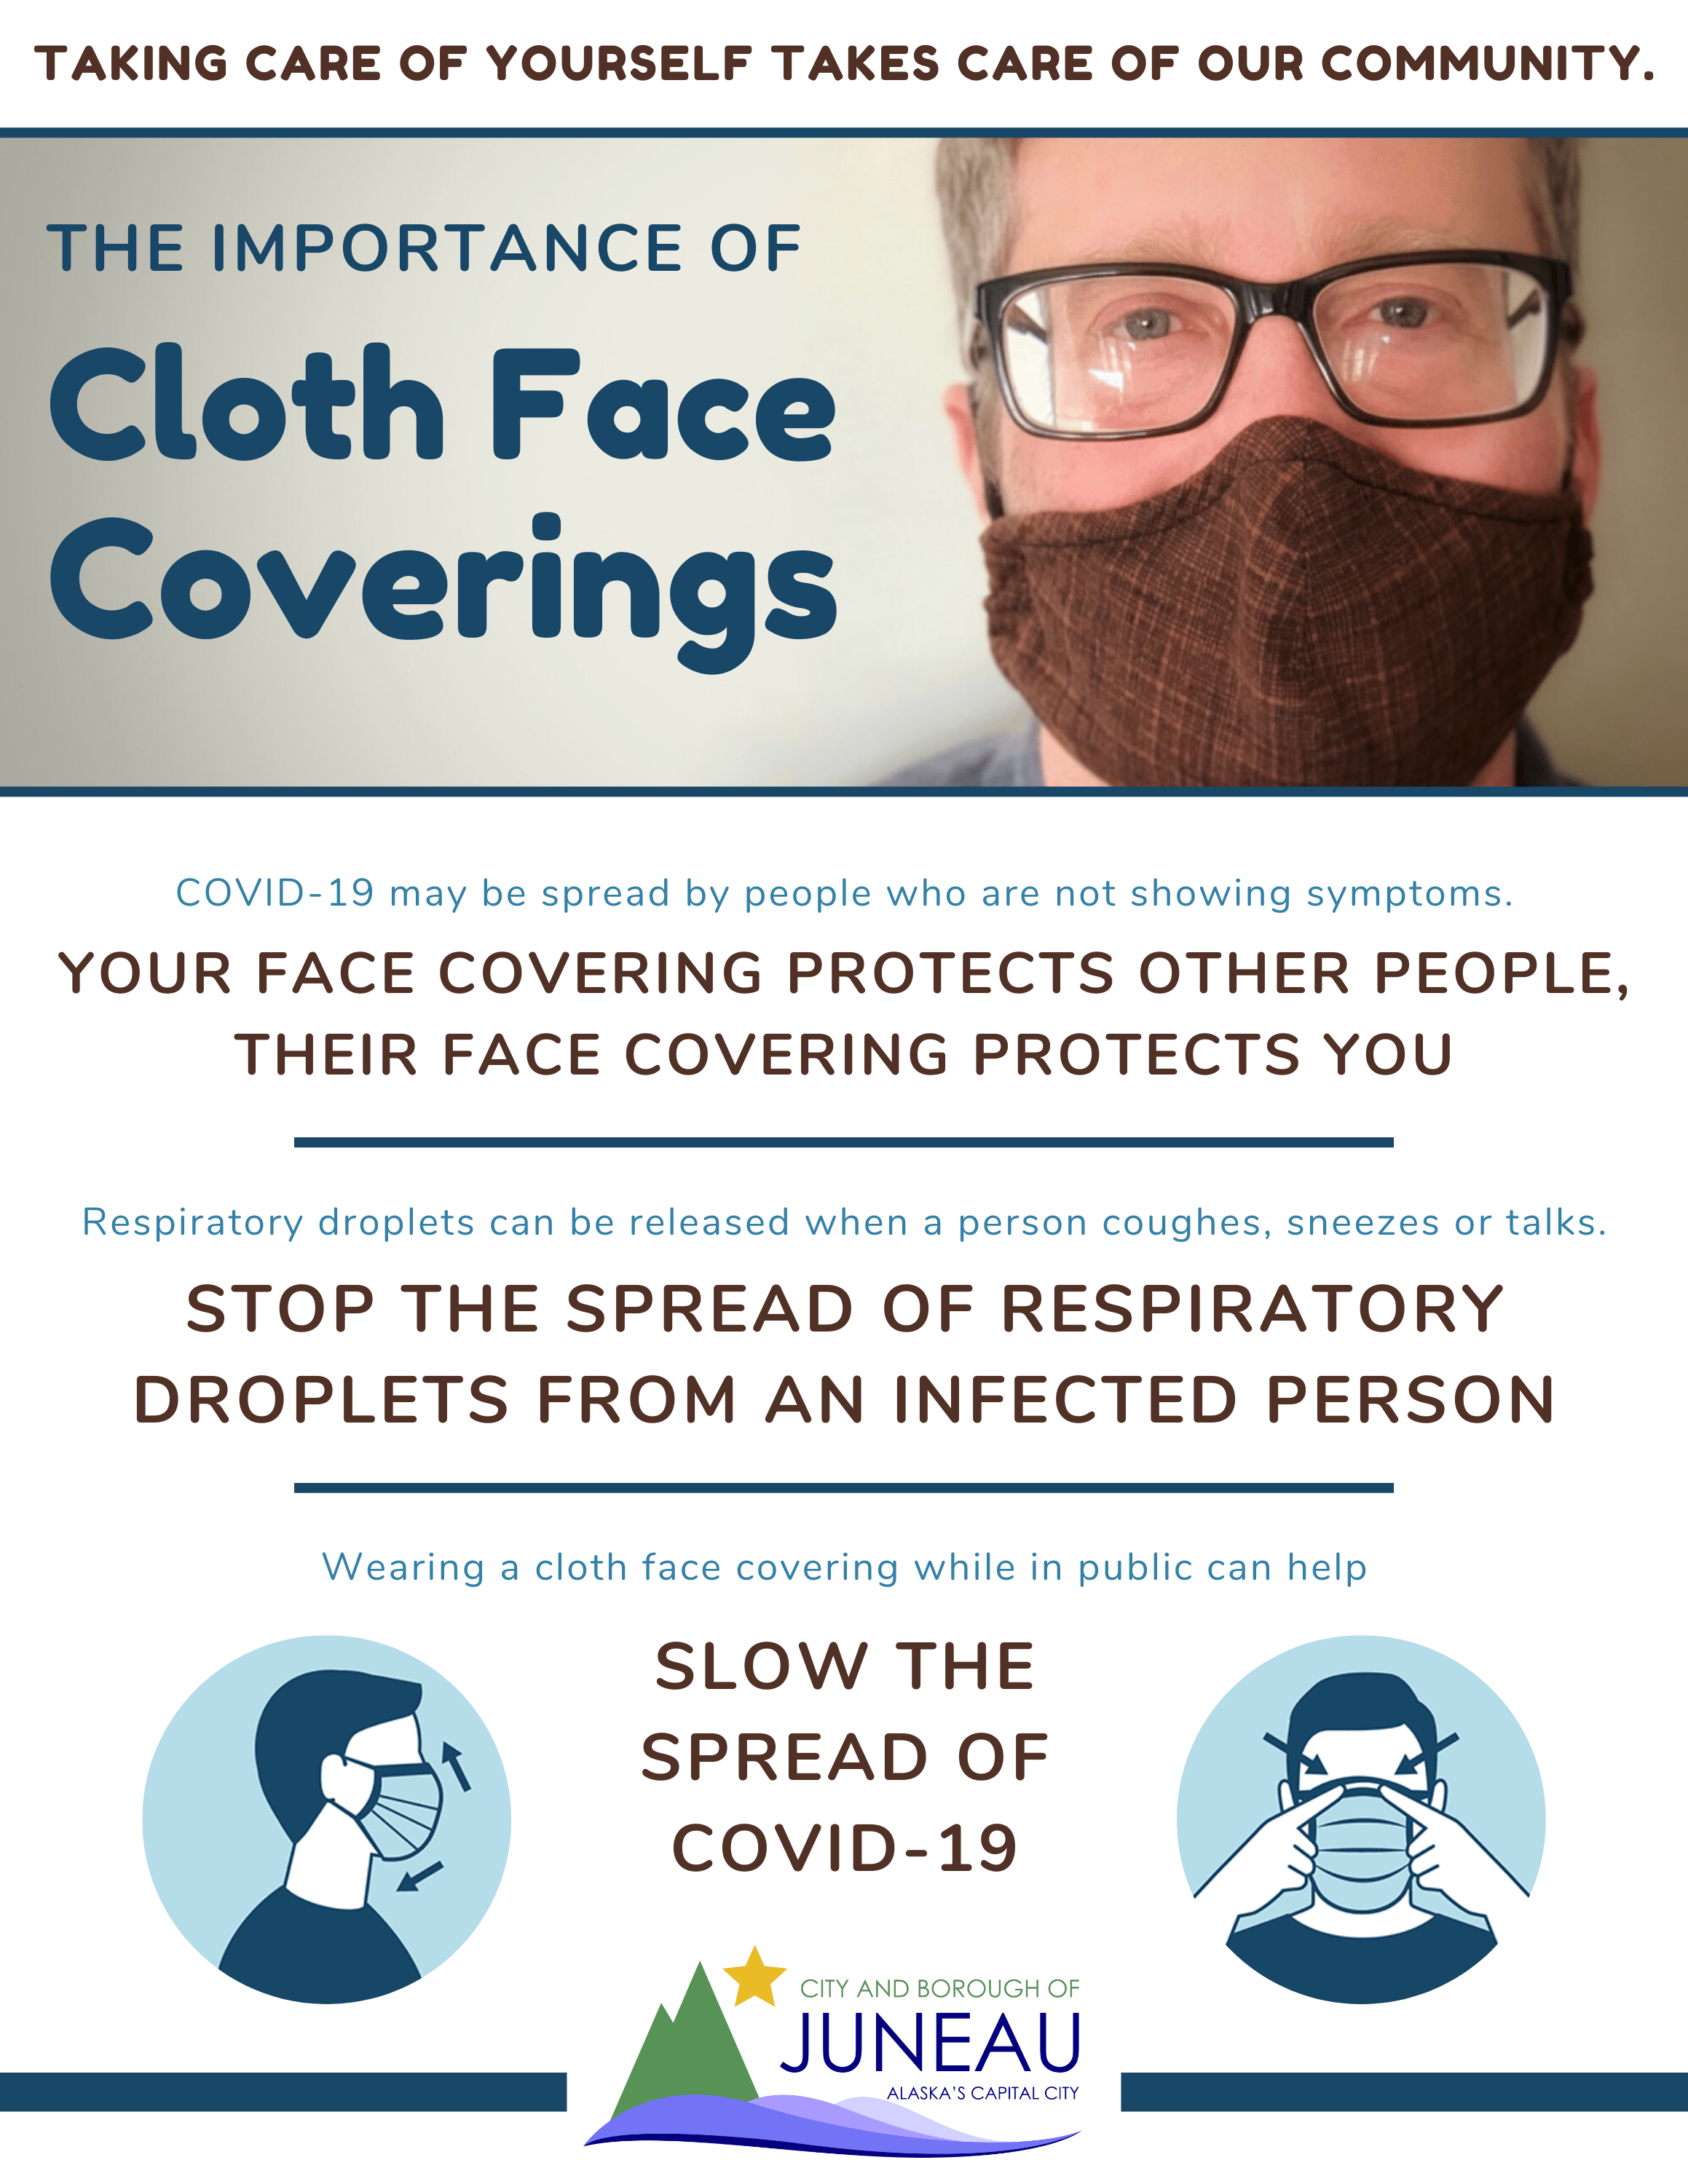 Click this image to view the PDF of the Importance of Cloth Face Coverings